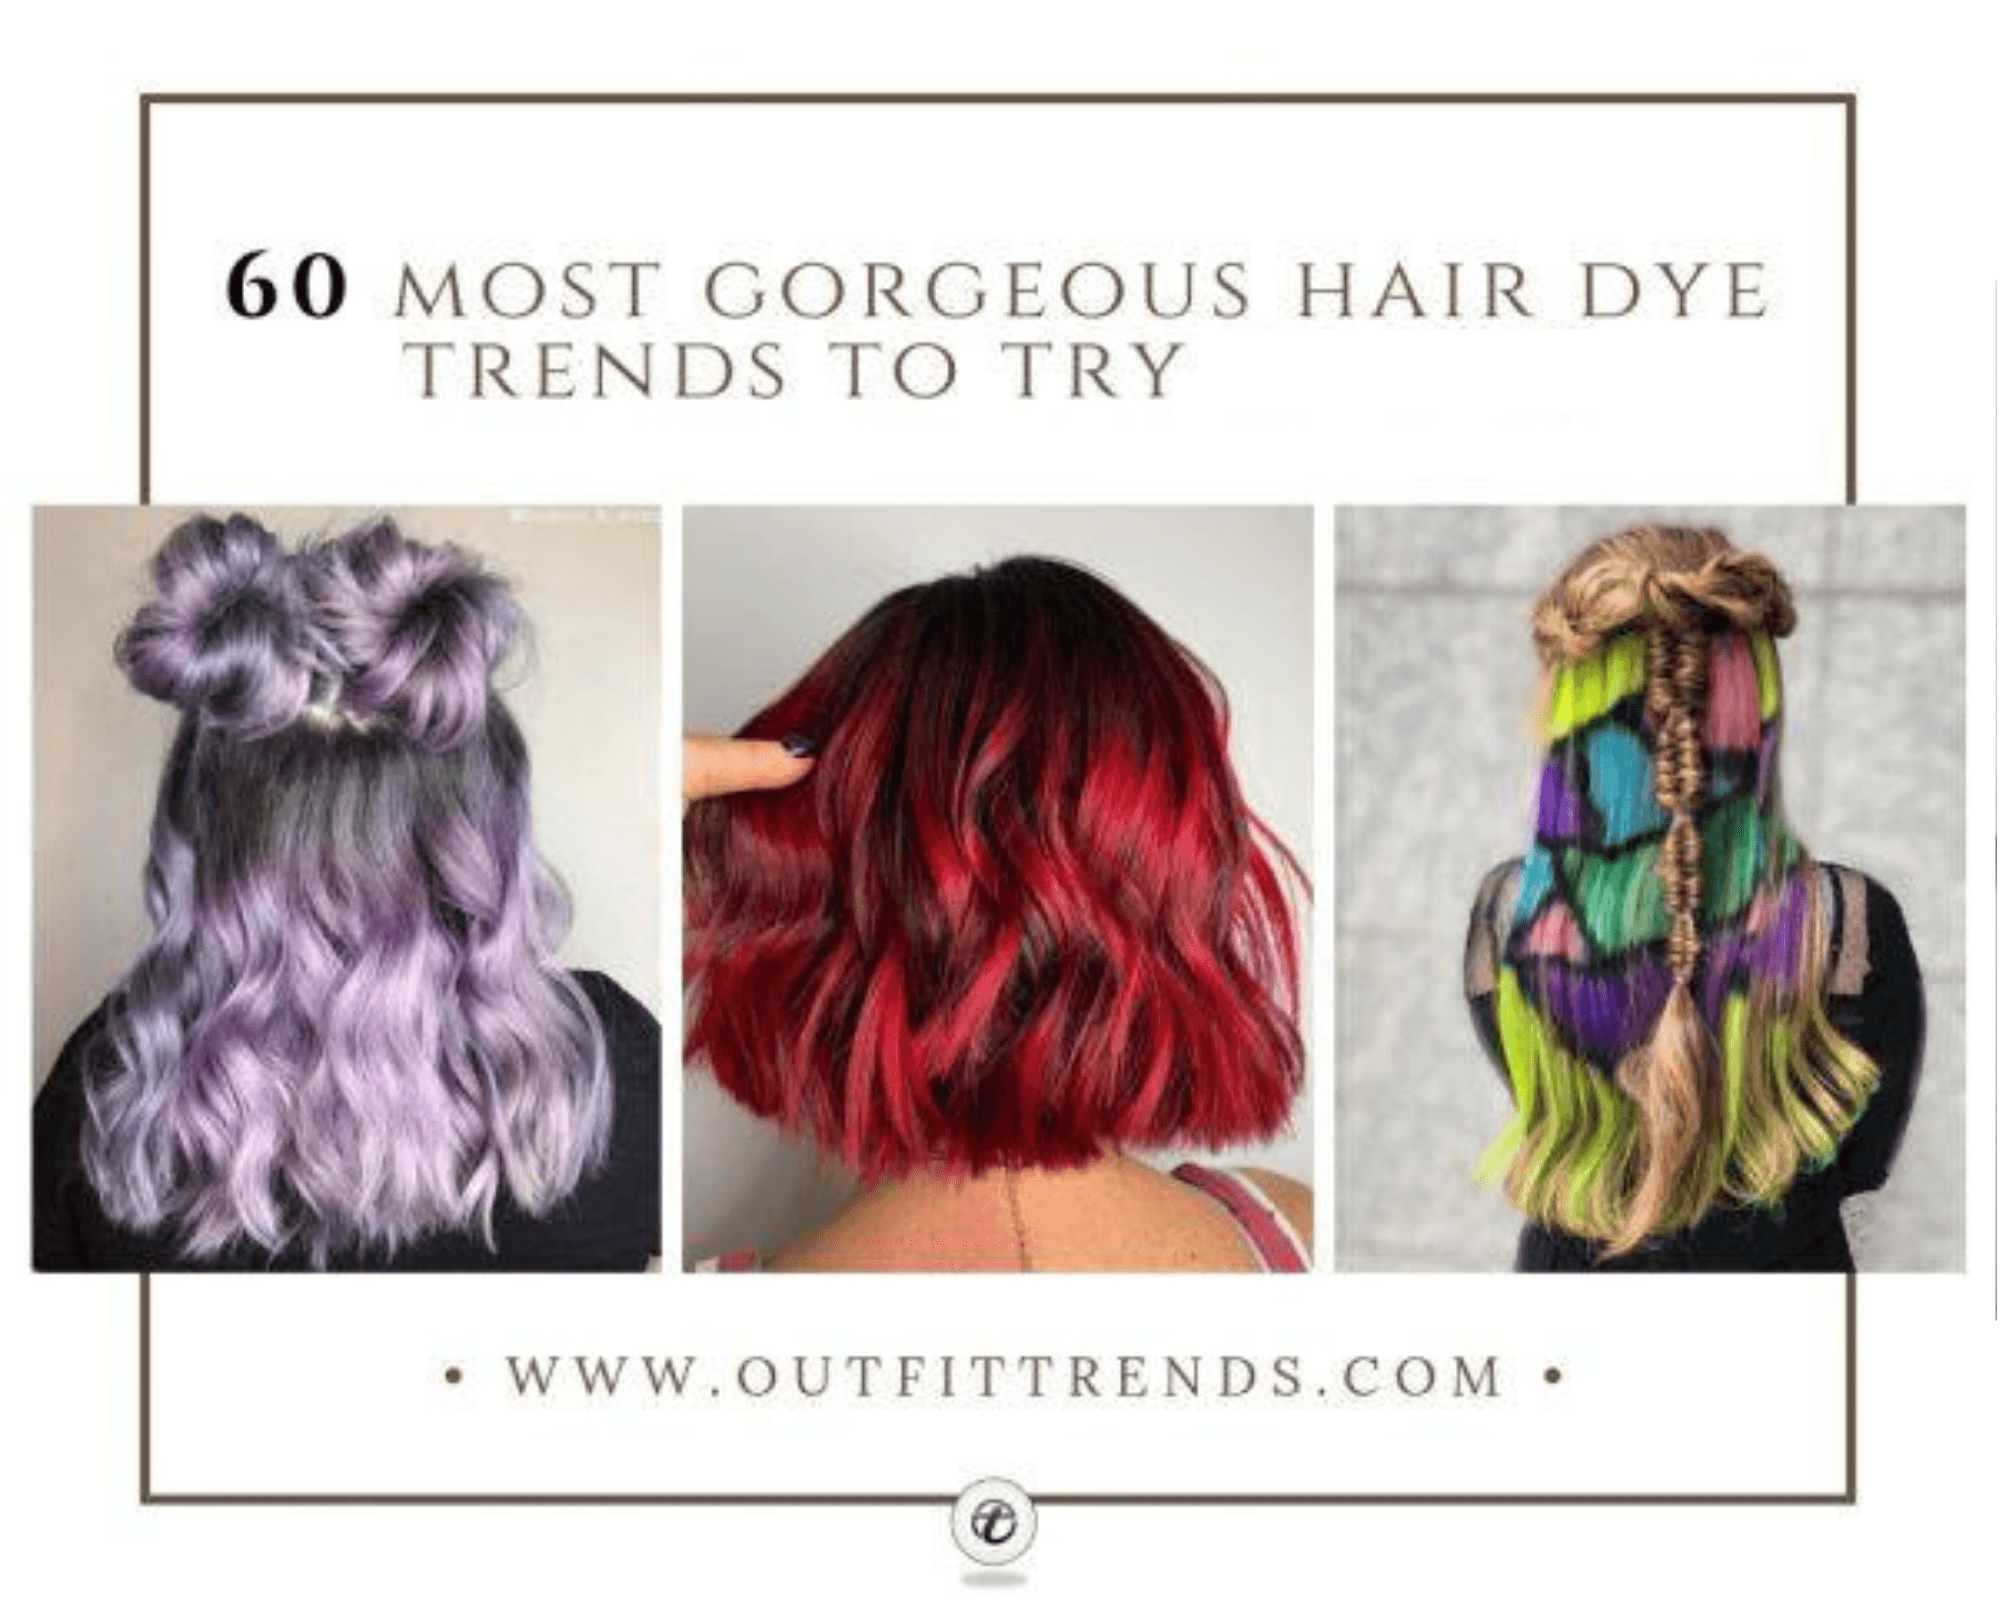 60 Most Gorgeous Hair Dye Trends For Women To Try In 2021